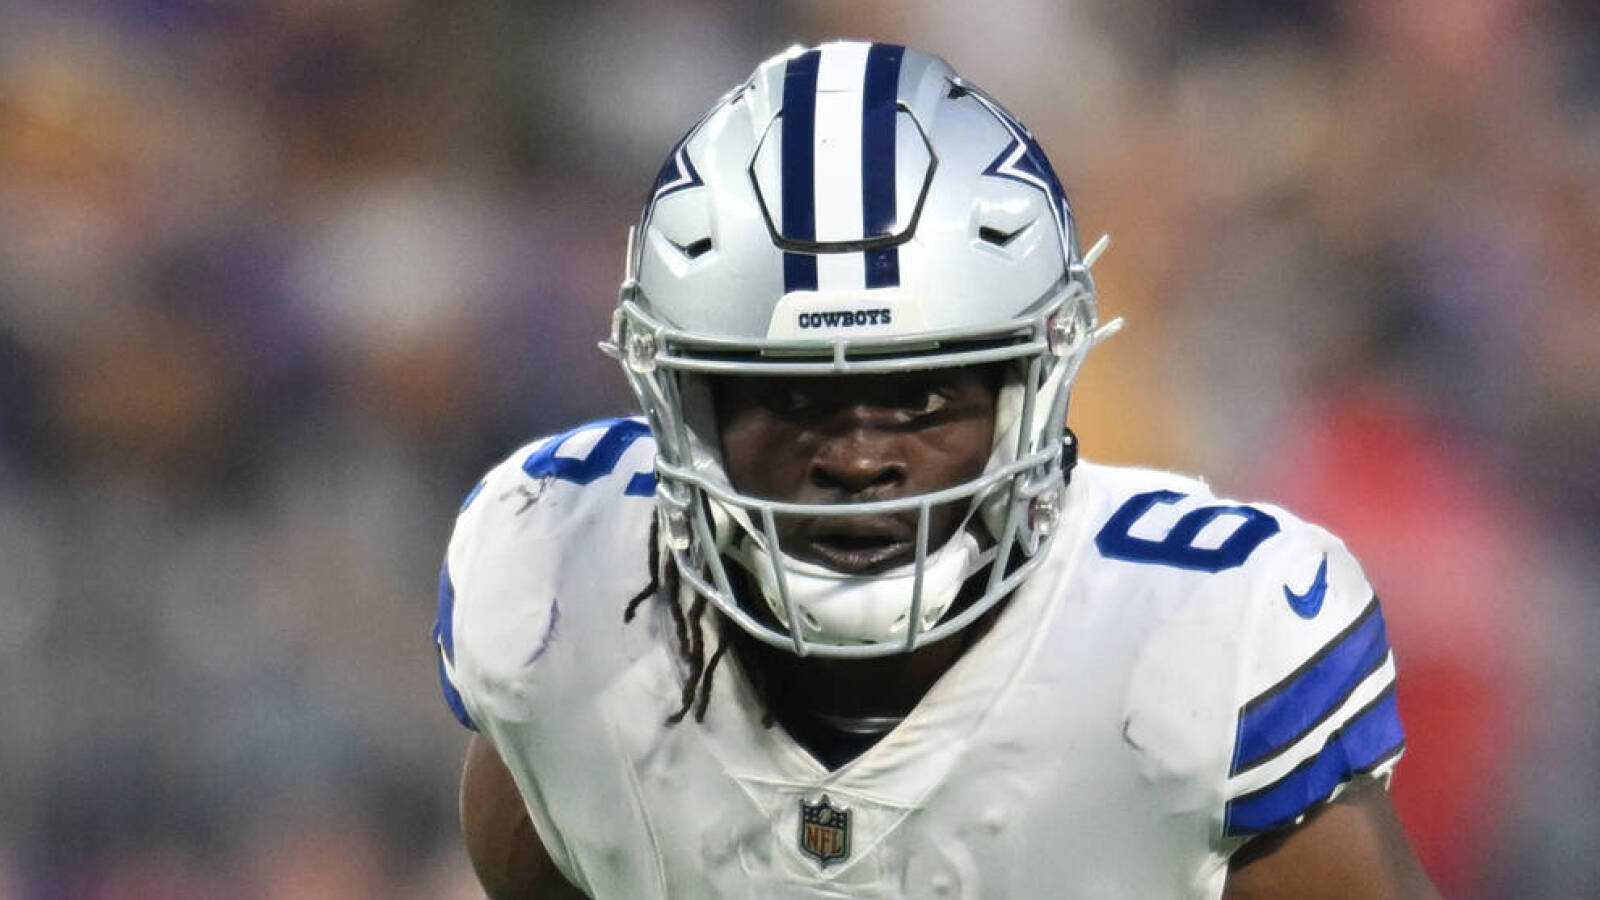 Do the Cowboys have a championship-caliber defense after huge offseason?